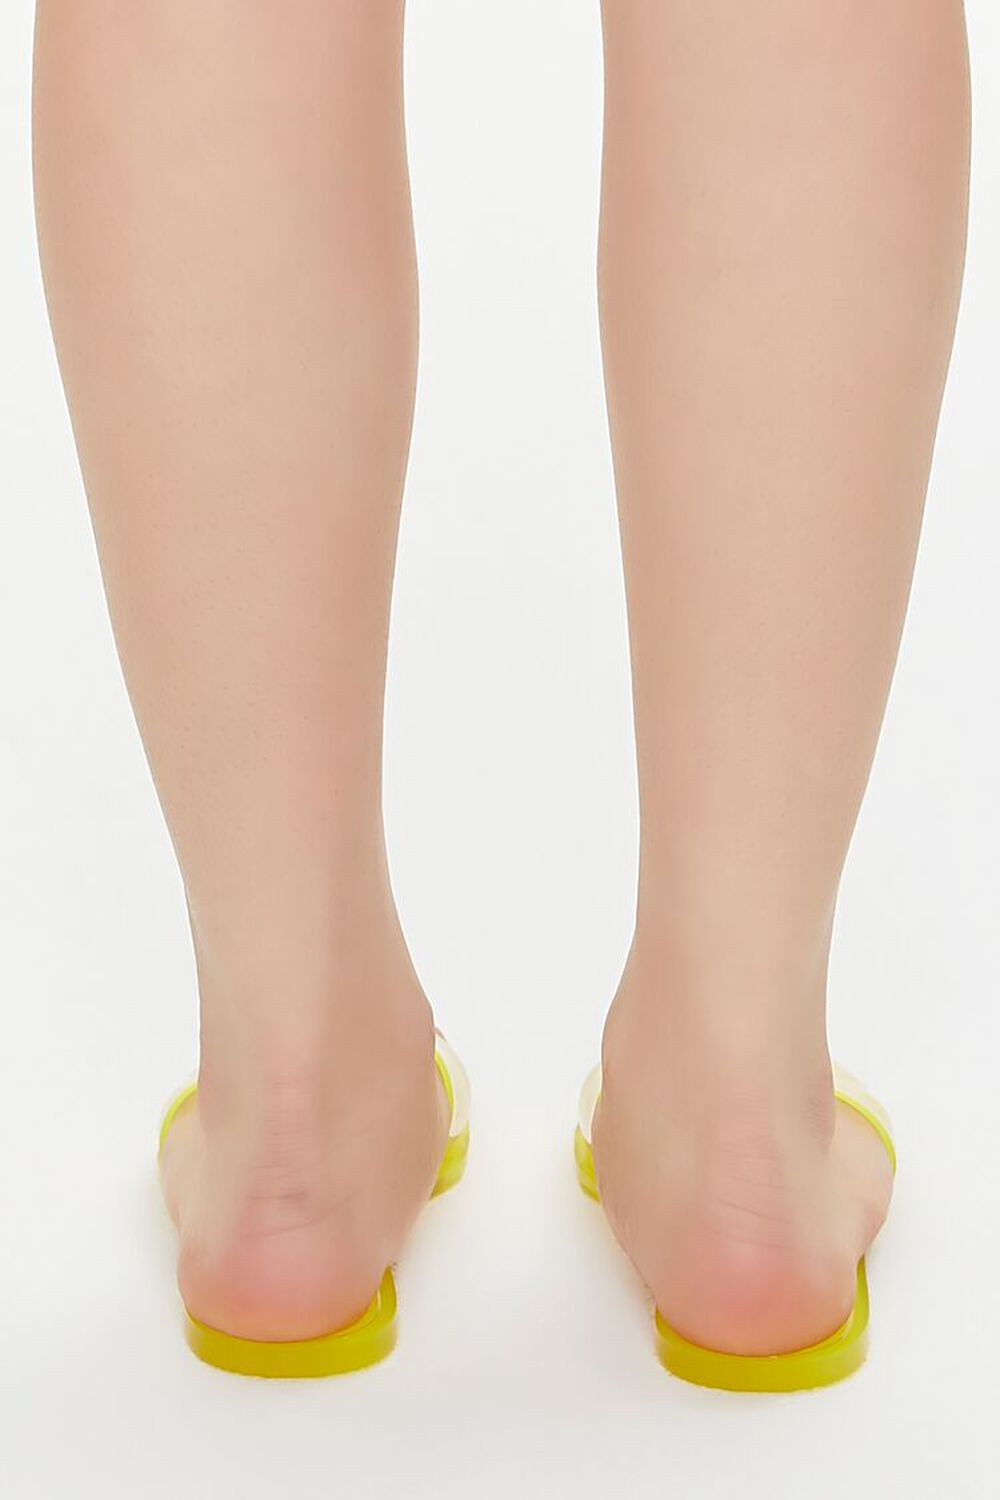 CELERY Jelly Square Toe Sandals, image 3